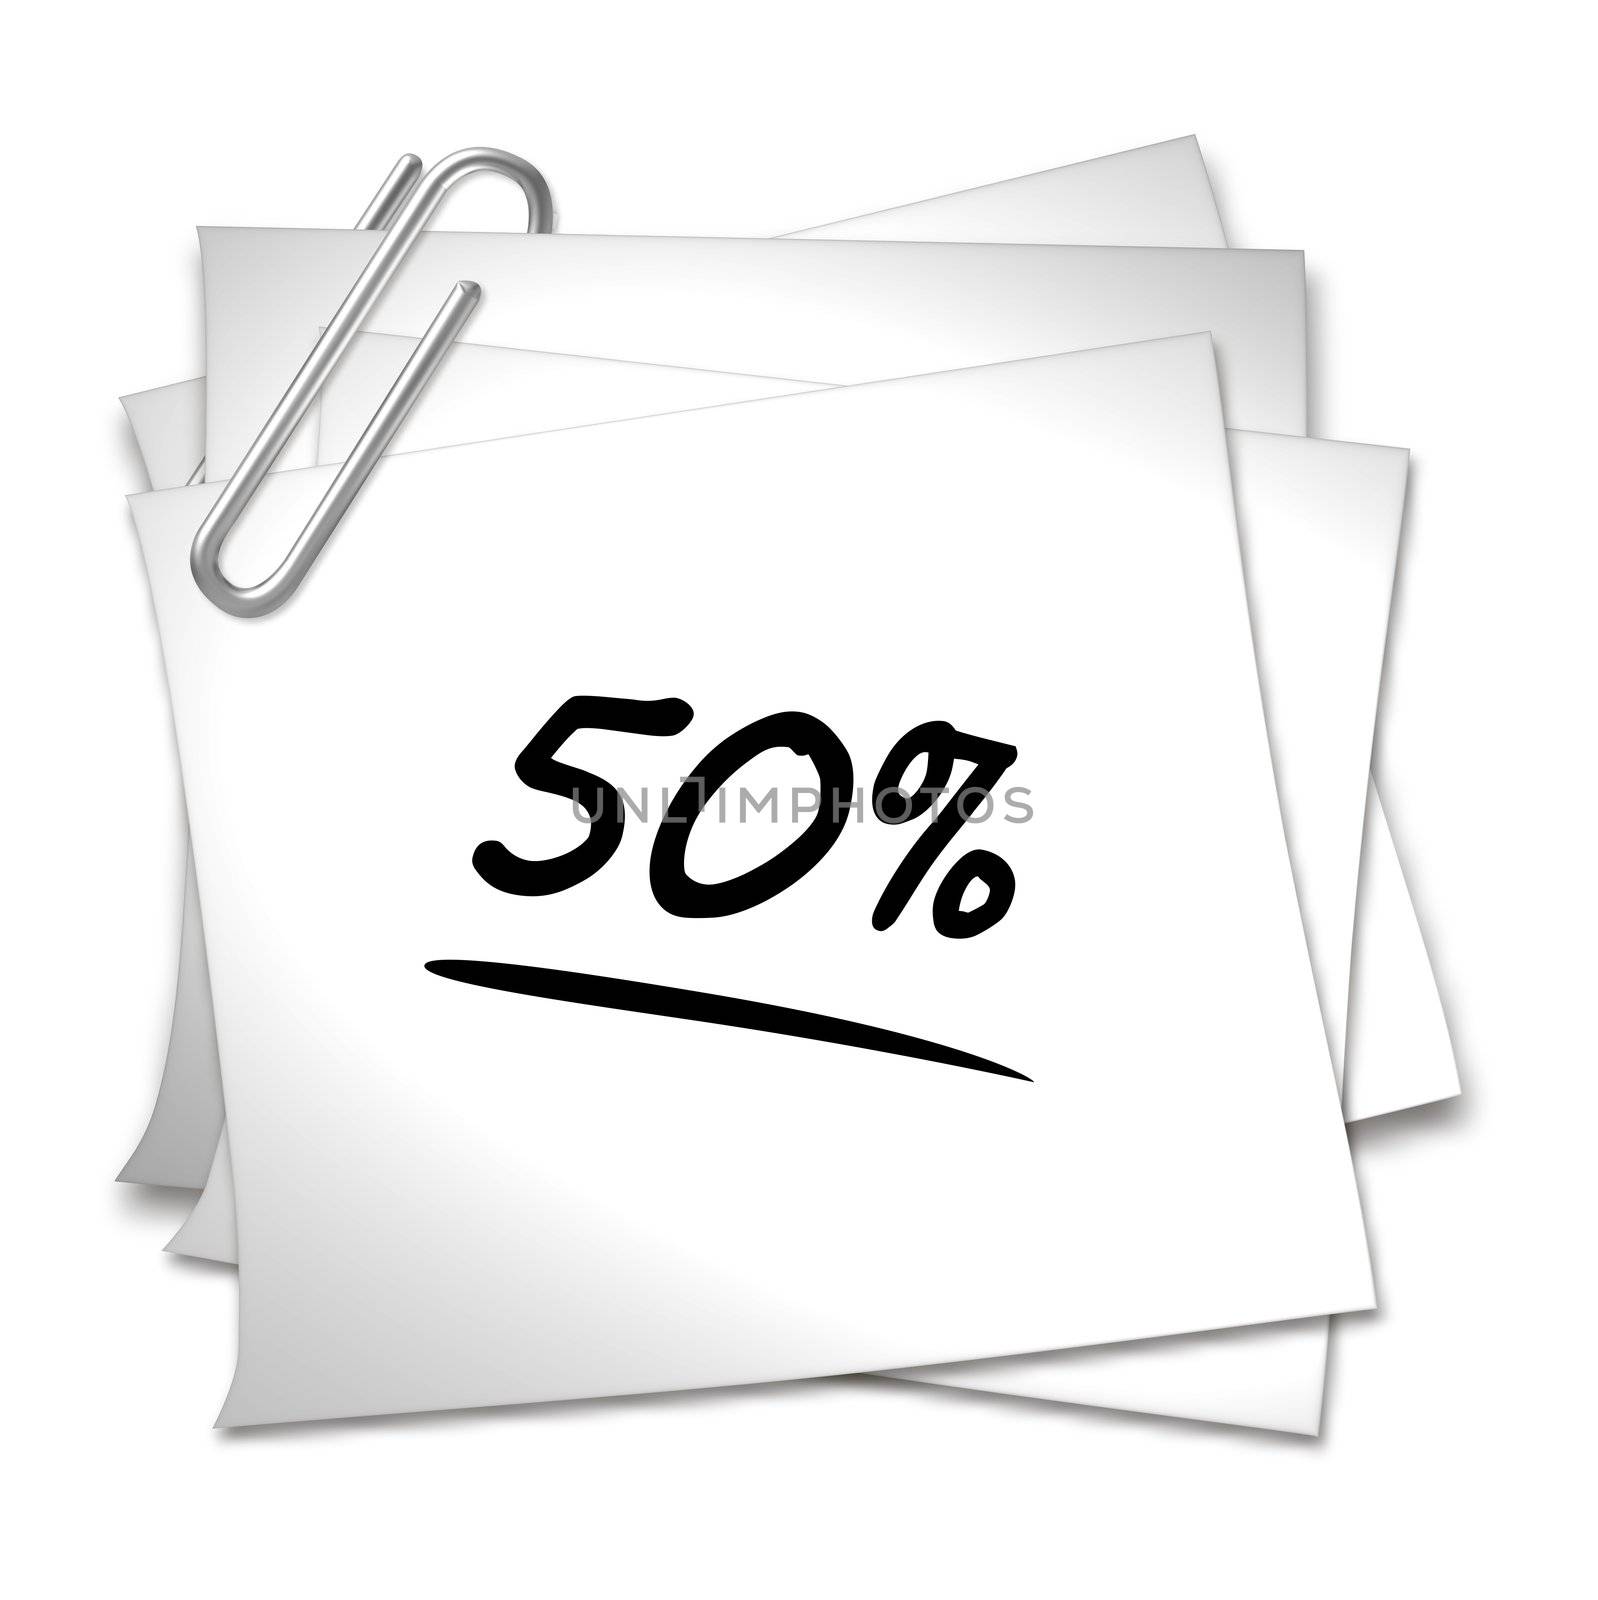 Memo with Paper Clip - 50 % by peromarketing